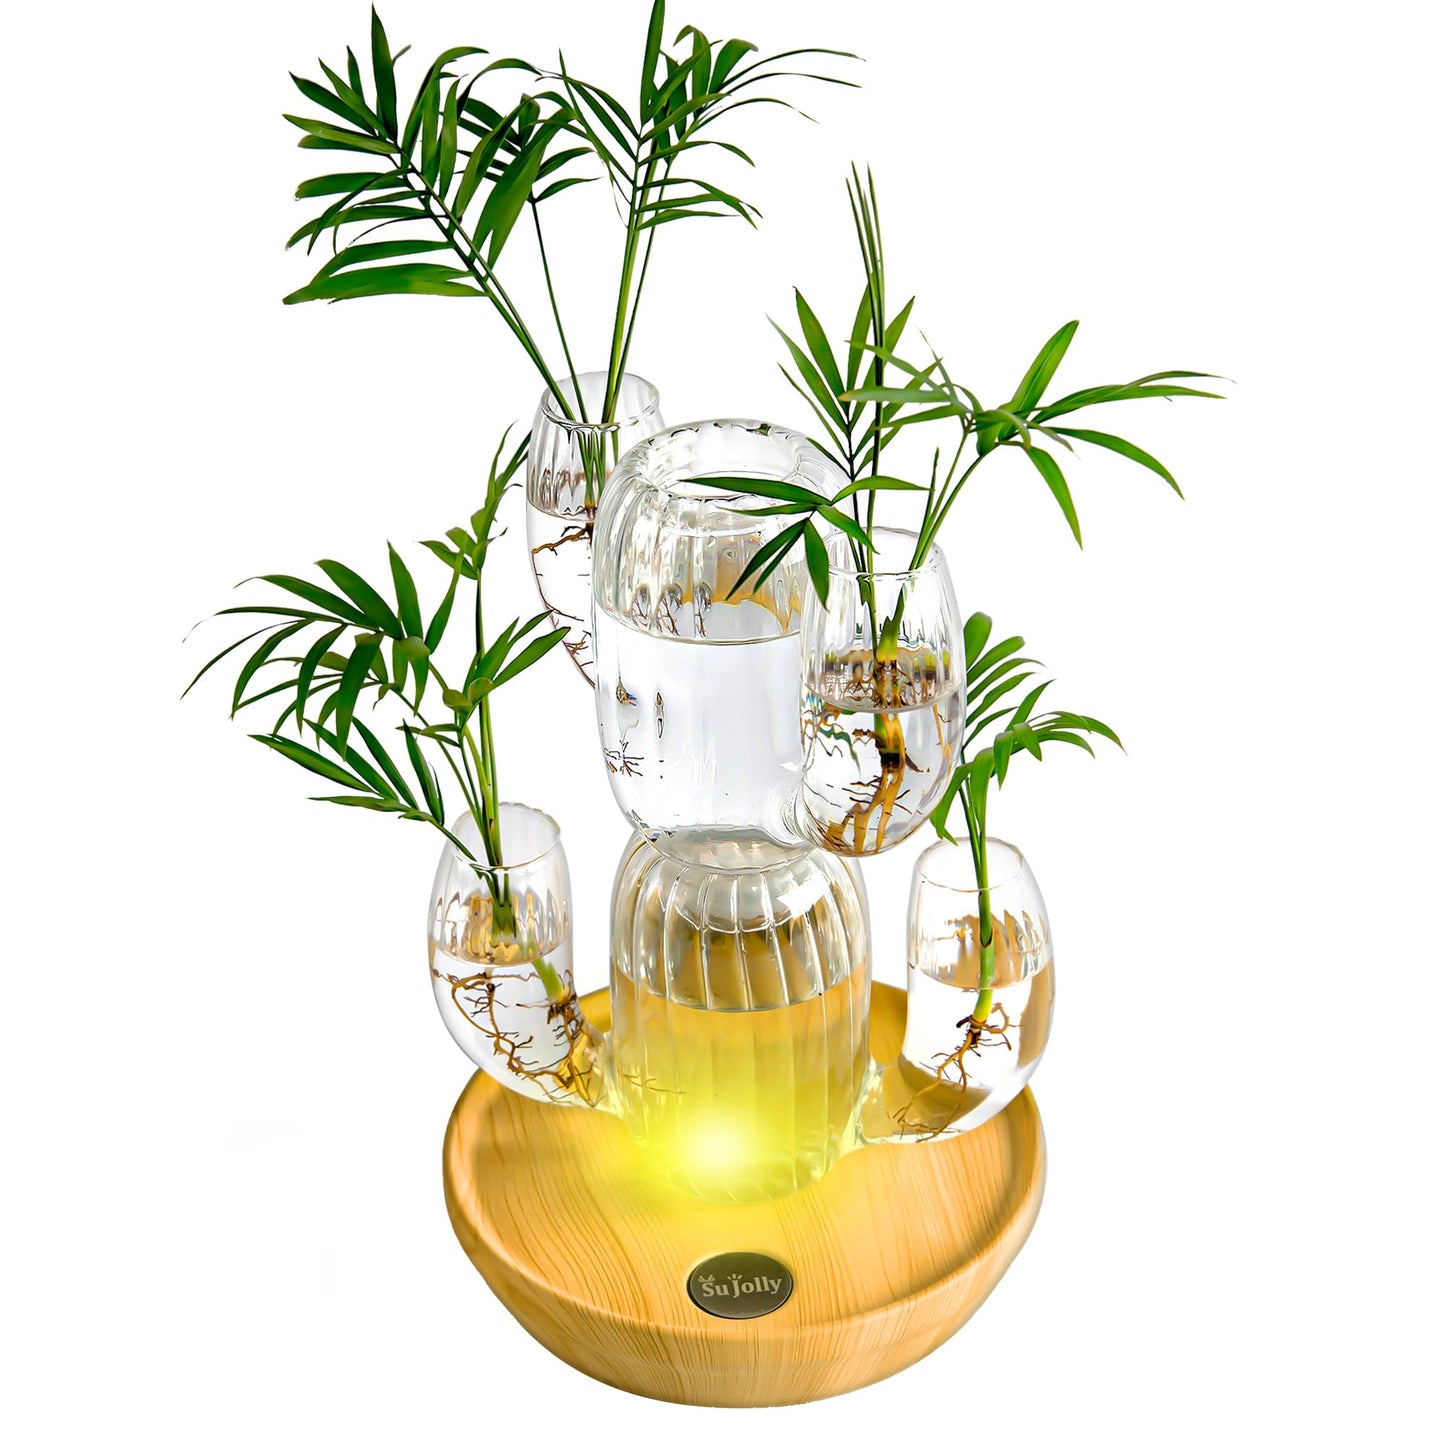 SuJolly Lighted Propagation Station with Metal Base, Glass Plant Terrarium with Touch Control RGB Light, Built-in Battery Cordless Operated, Home Office Wedding Decor, Gift for Plant Lovers (Clear) - Plantonio